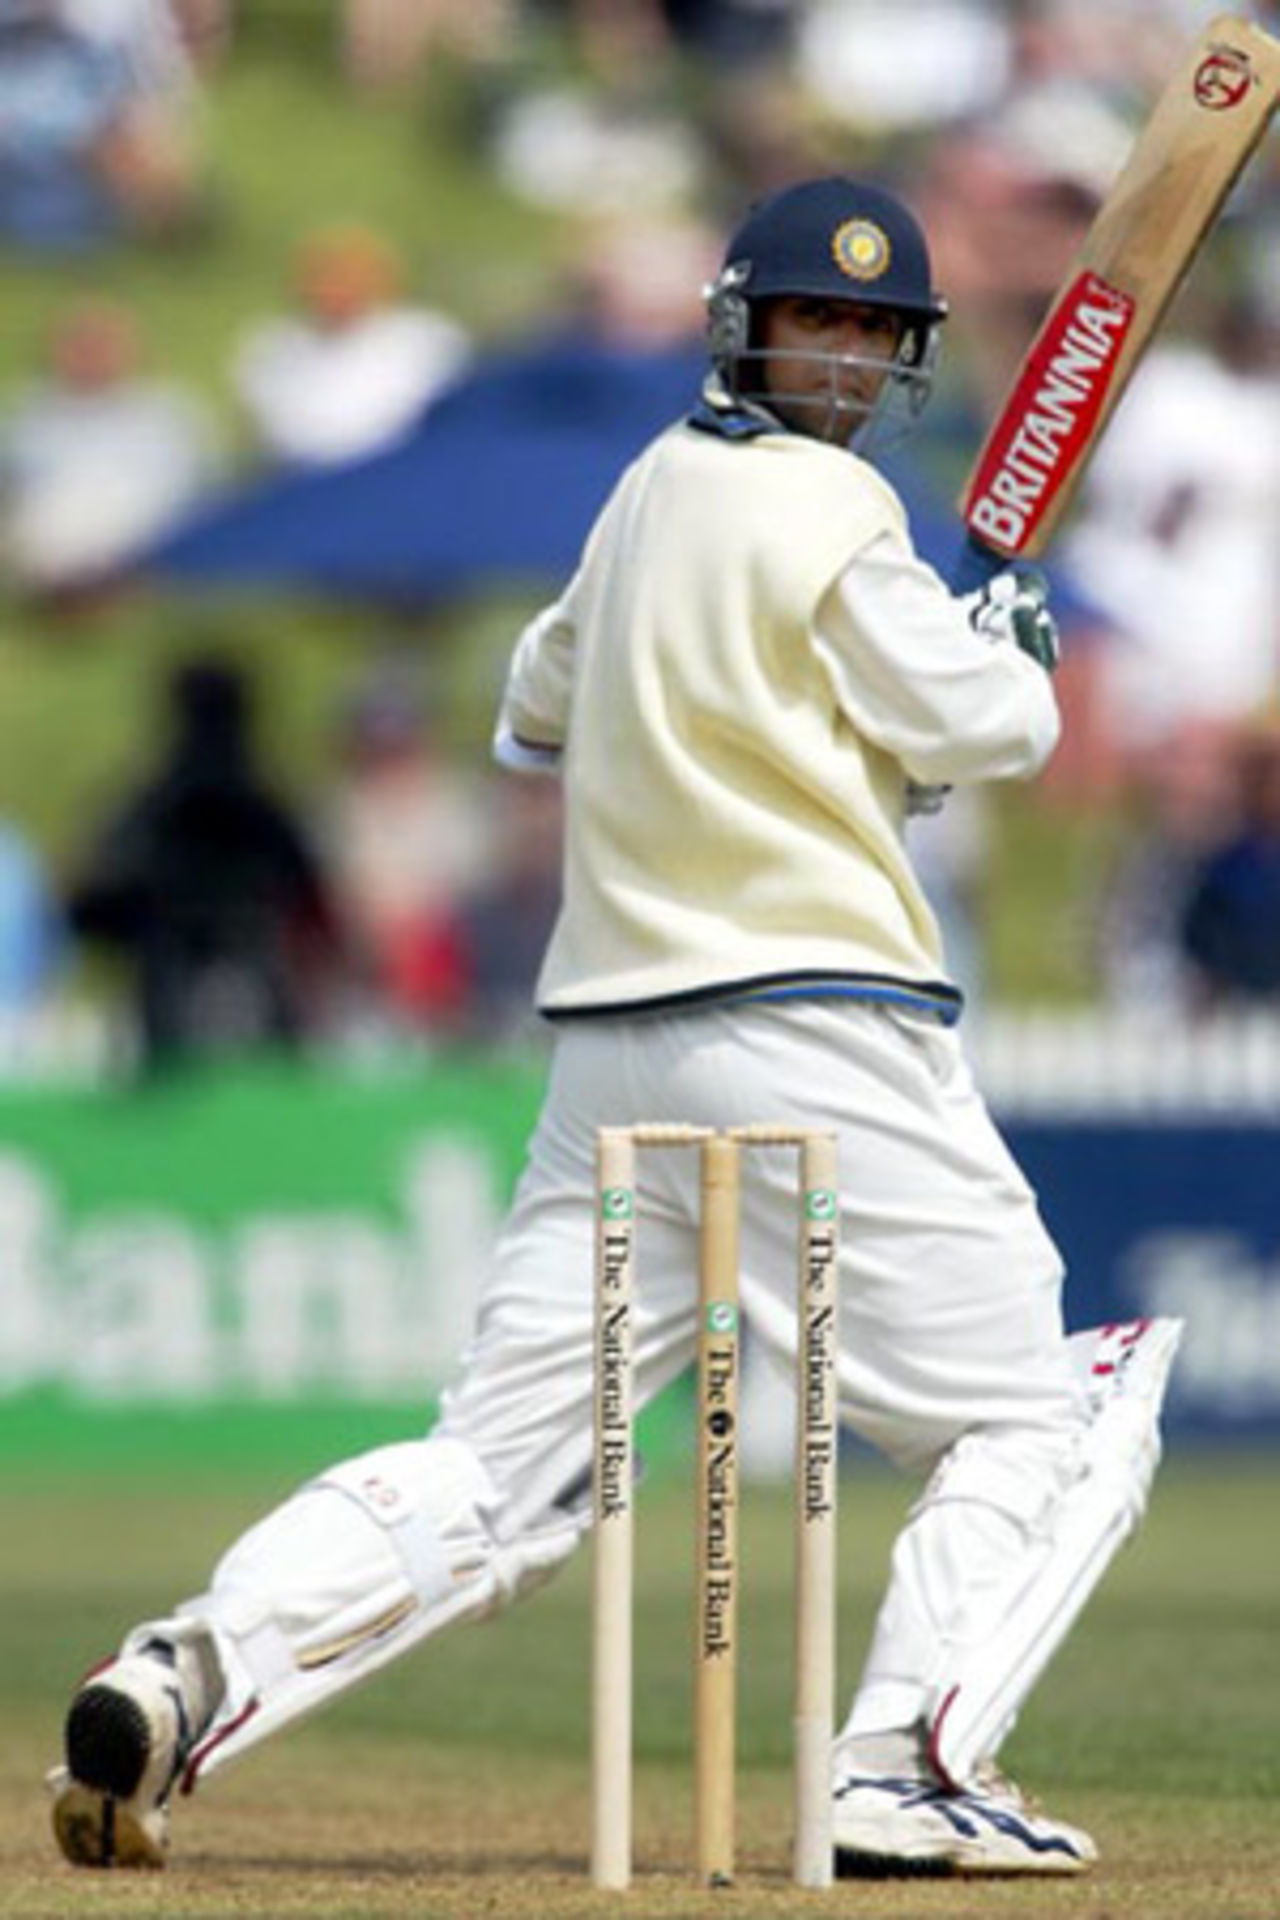 Indian batsman Rahul Dravid chops a delivery just past his stumps down towards fine leg during his second innings of 39. 2nd Test: New Zealand v India at Westpac Park, Hamilton, 19-23 December 2002 (21 December 2002).